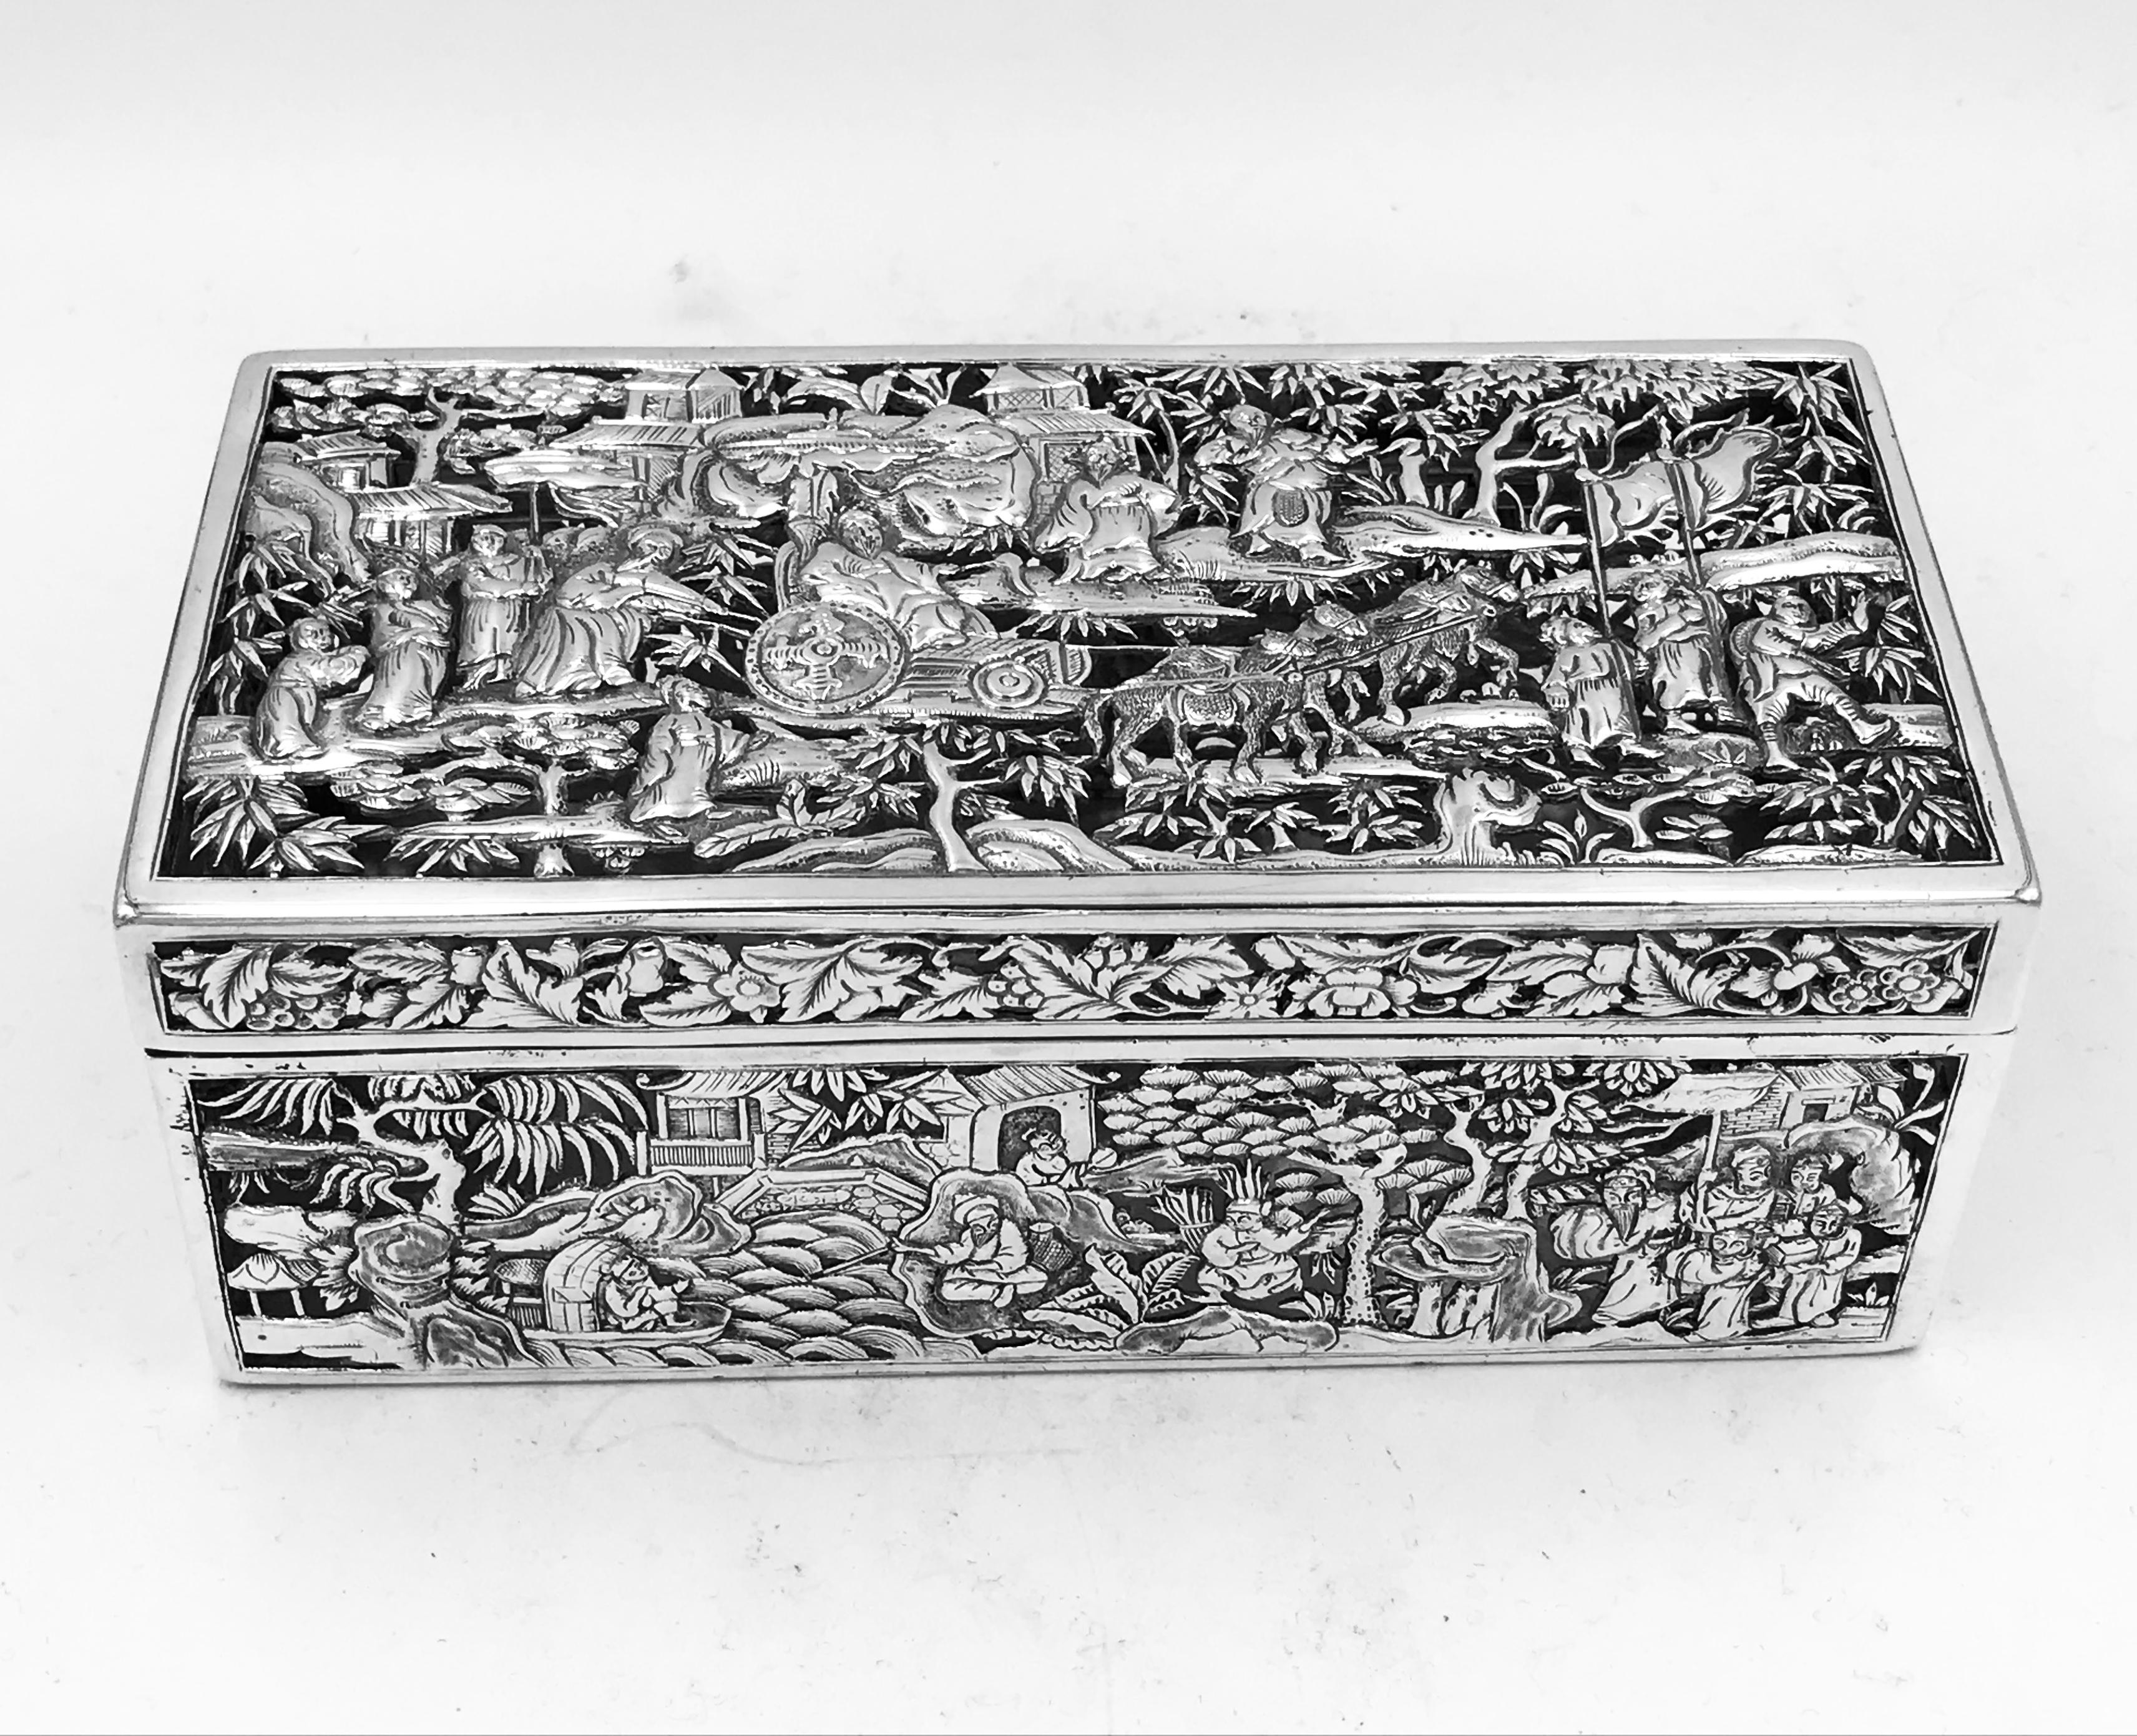 A Chinese export silver box pierced on five sides with figural court and battle scenes.
The box was made circa 1875, weighs 500gms and has the mark of Da Xing 大兴,
 